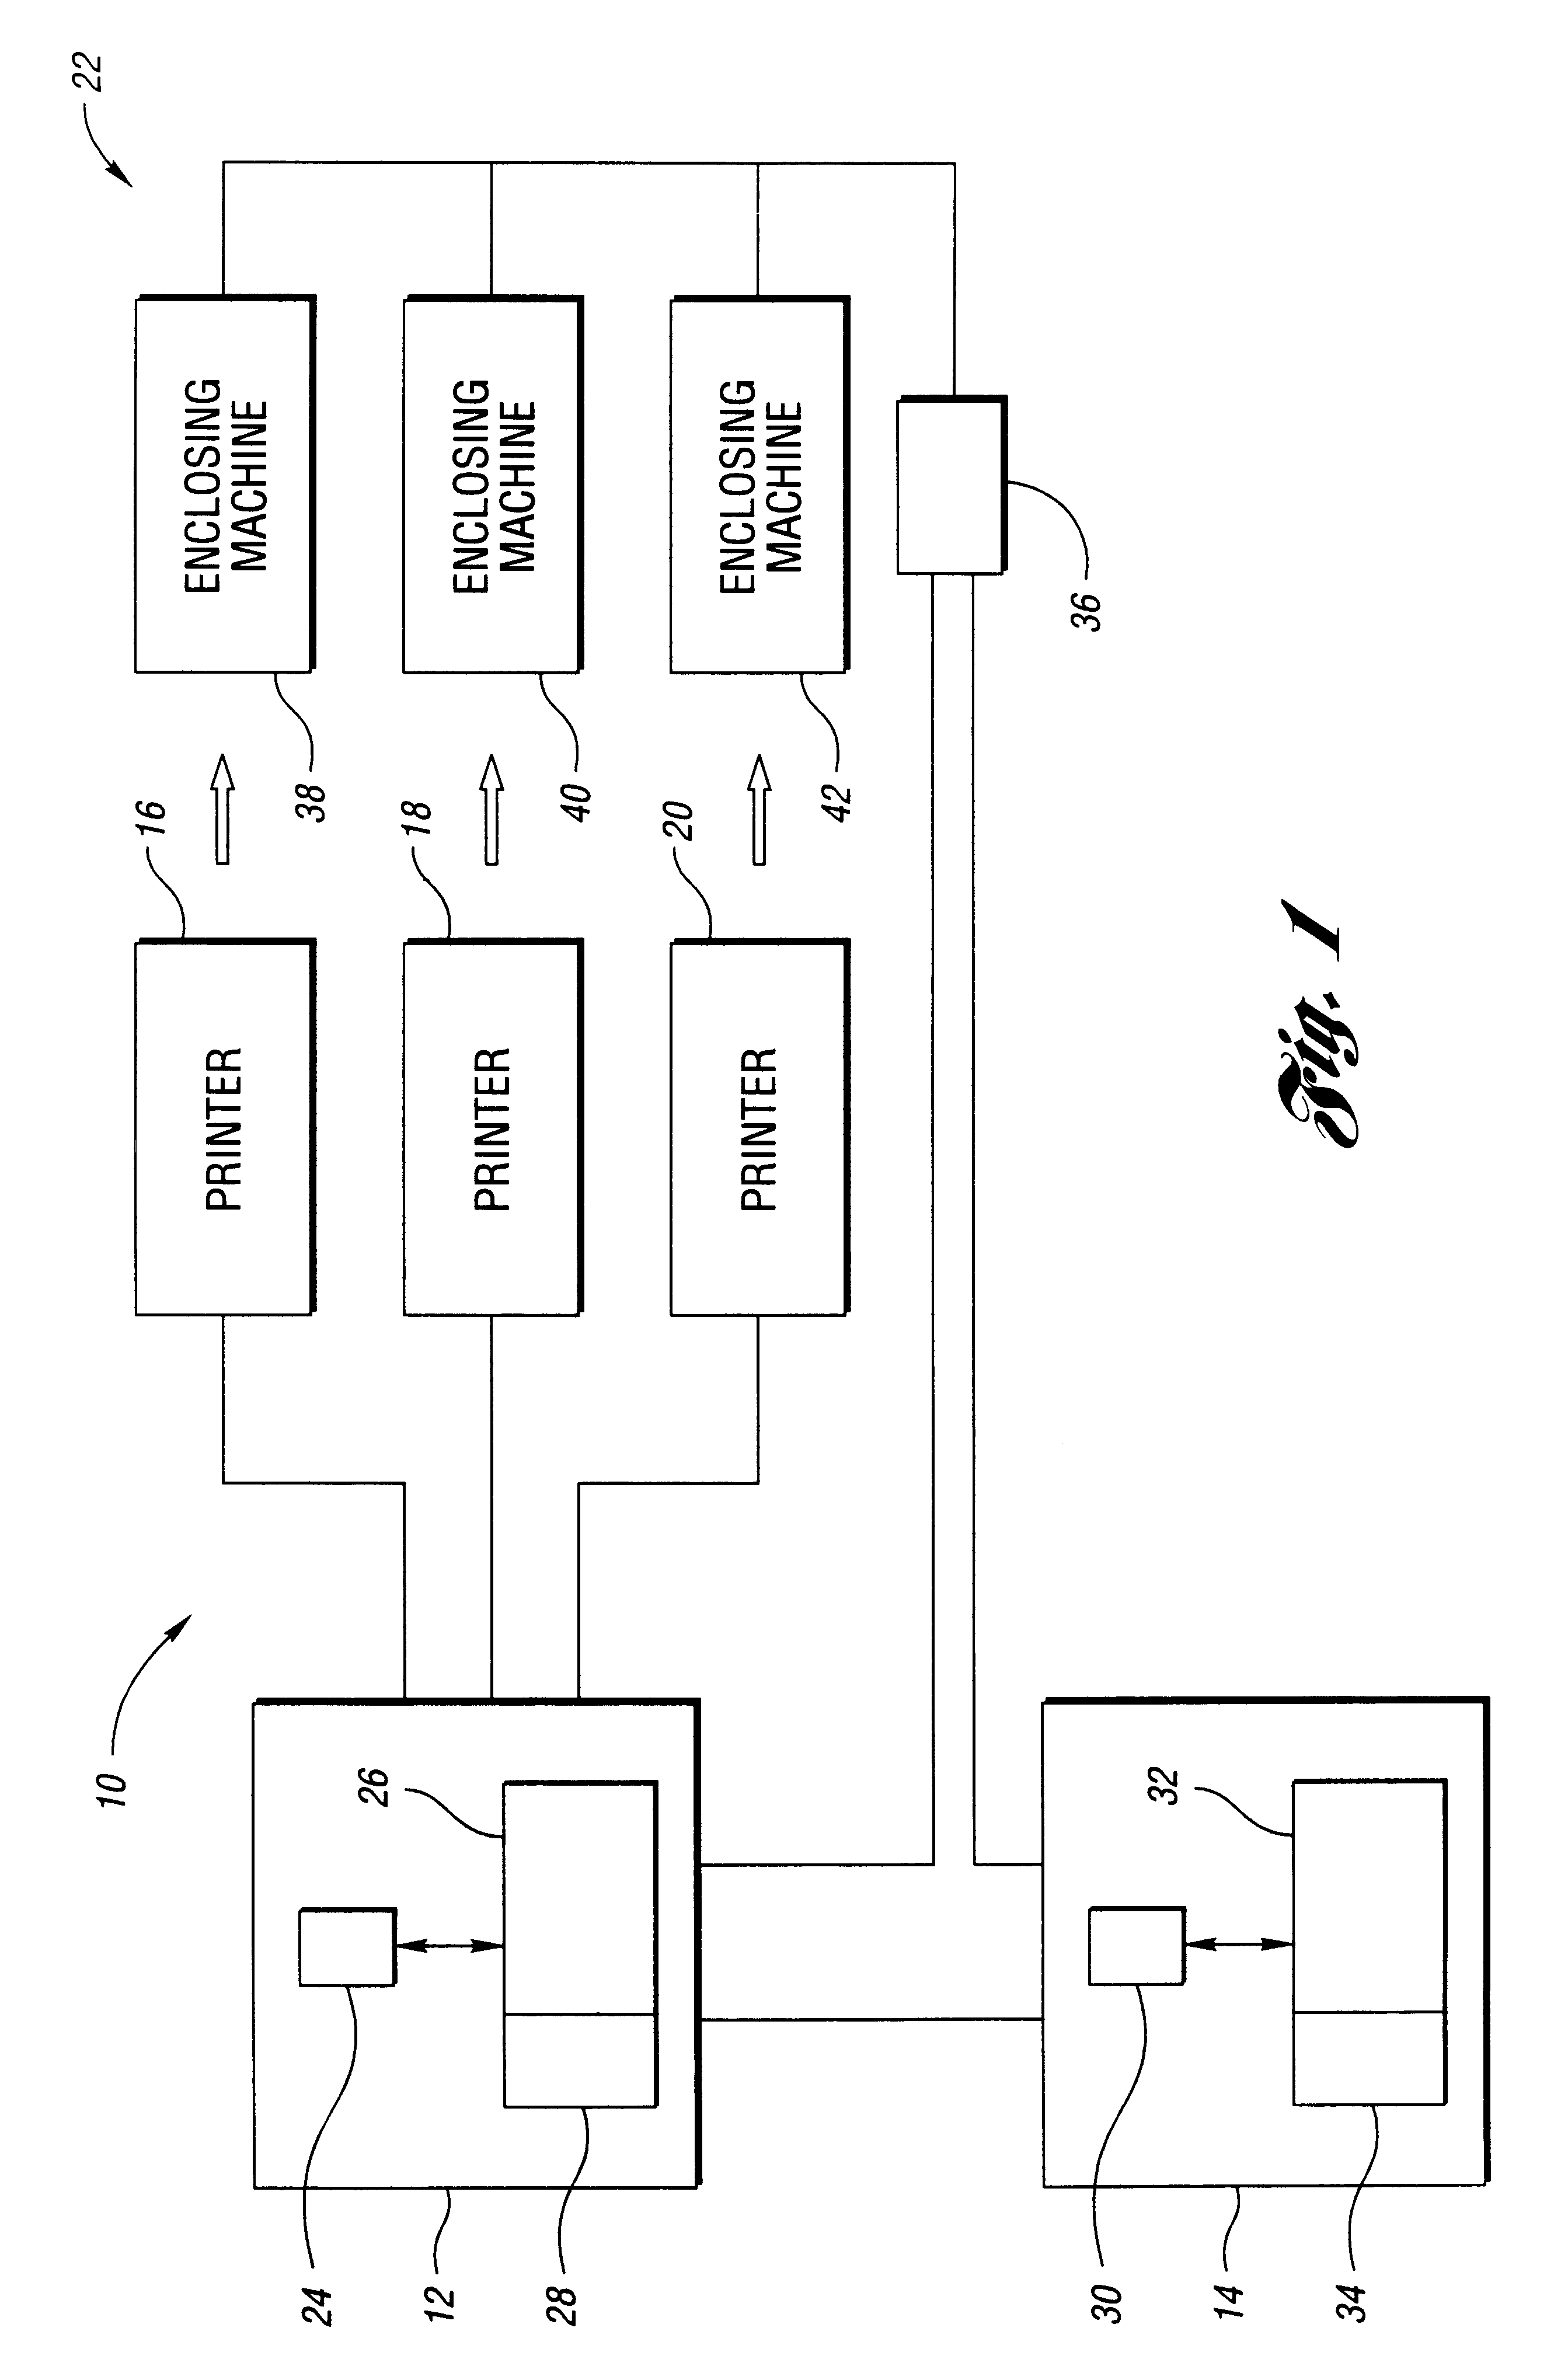 Document reprint method and system